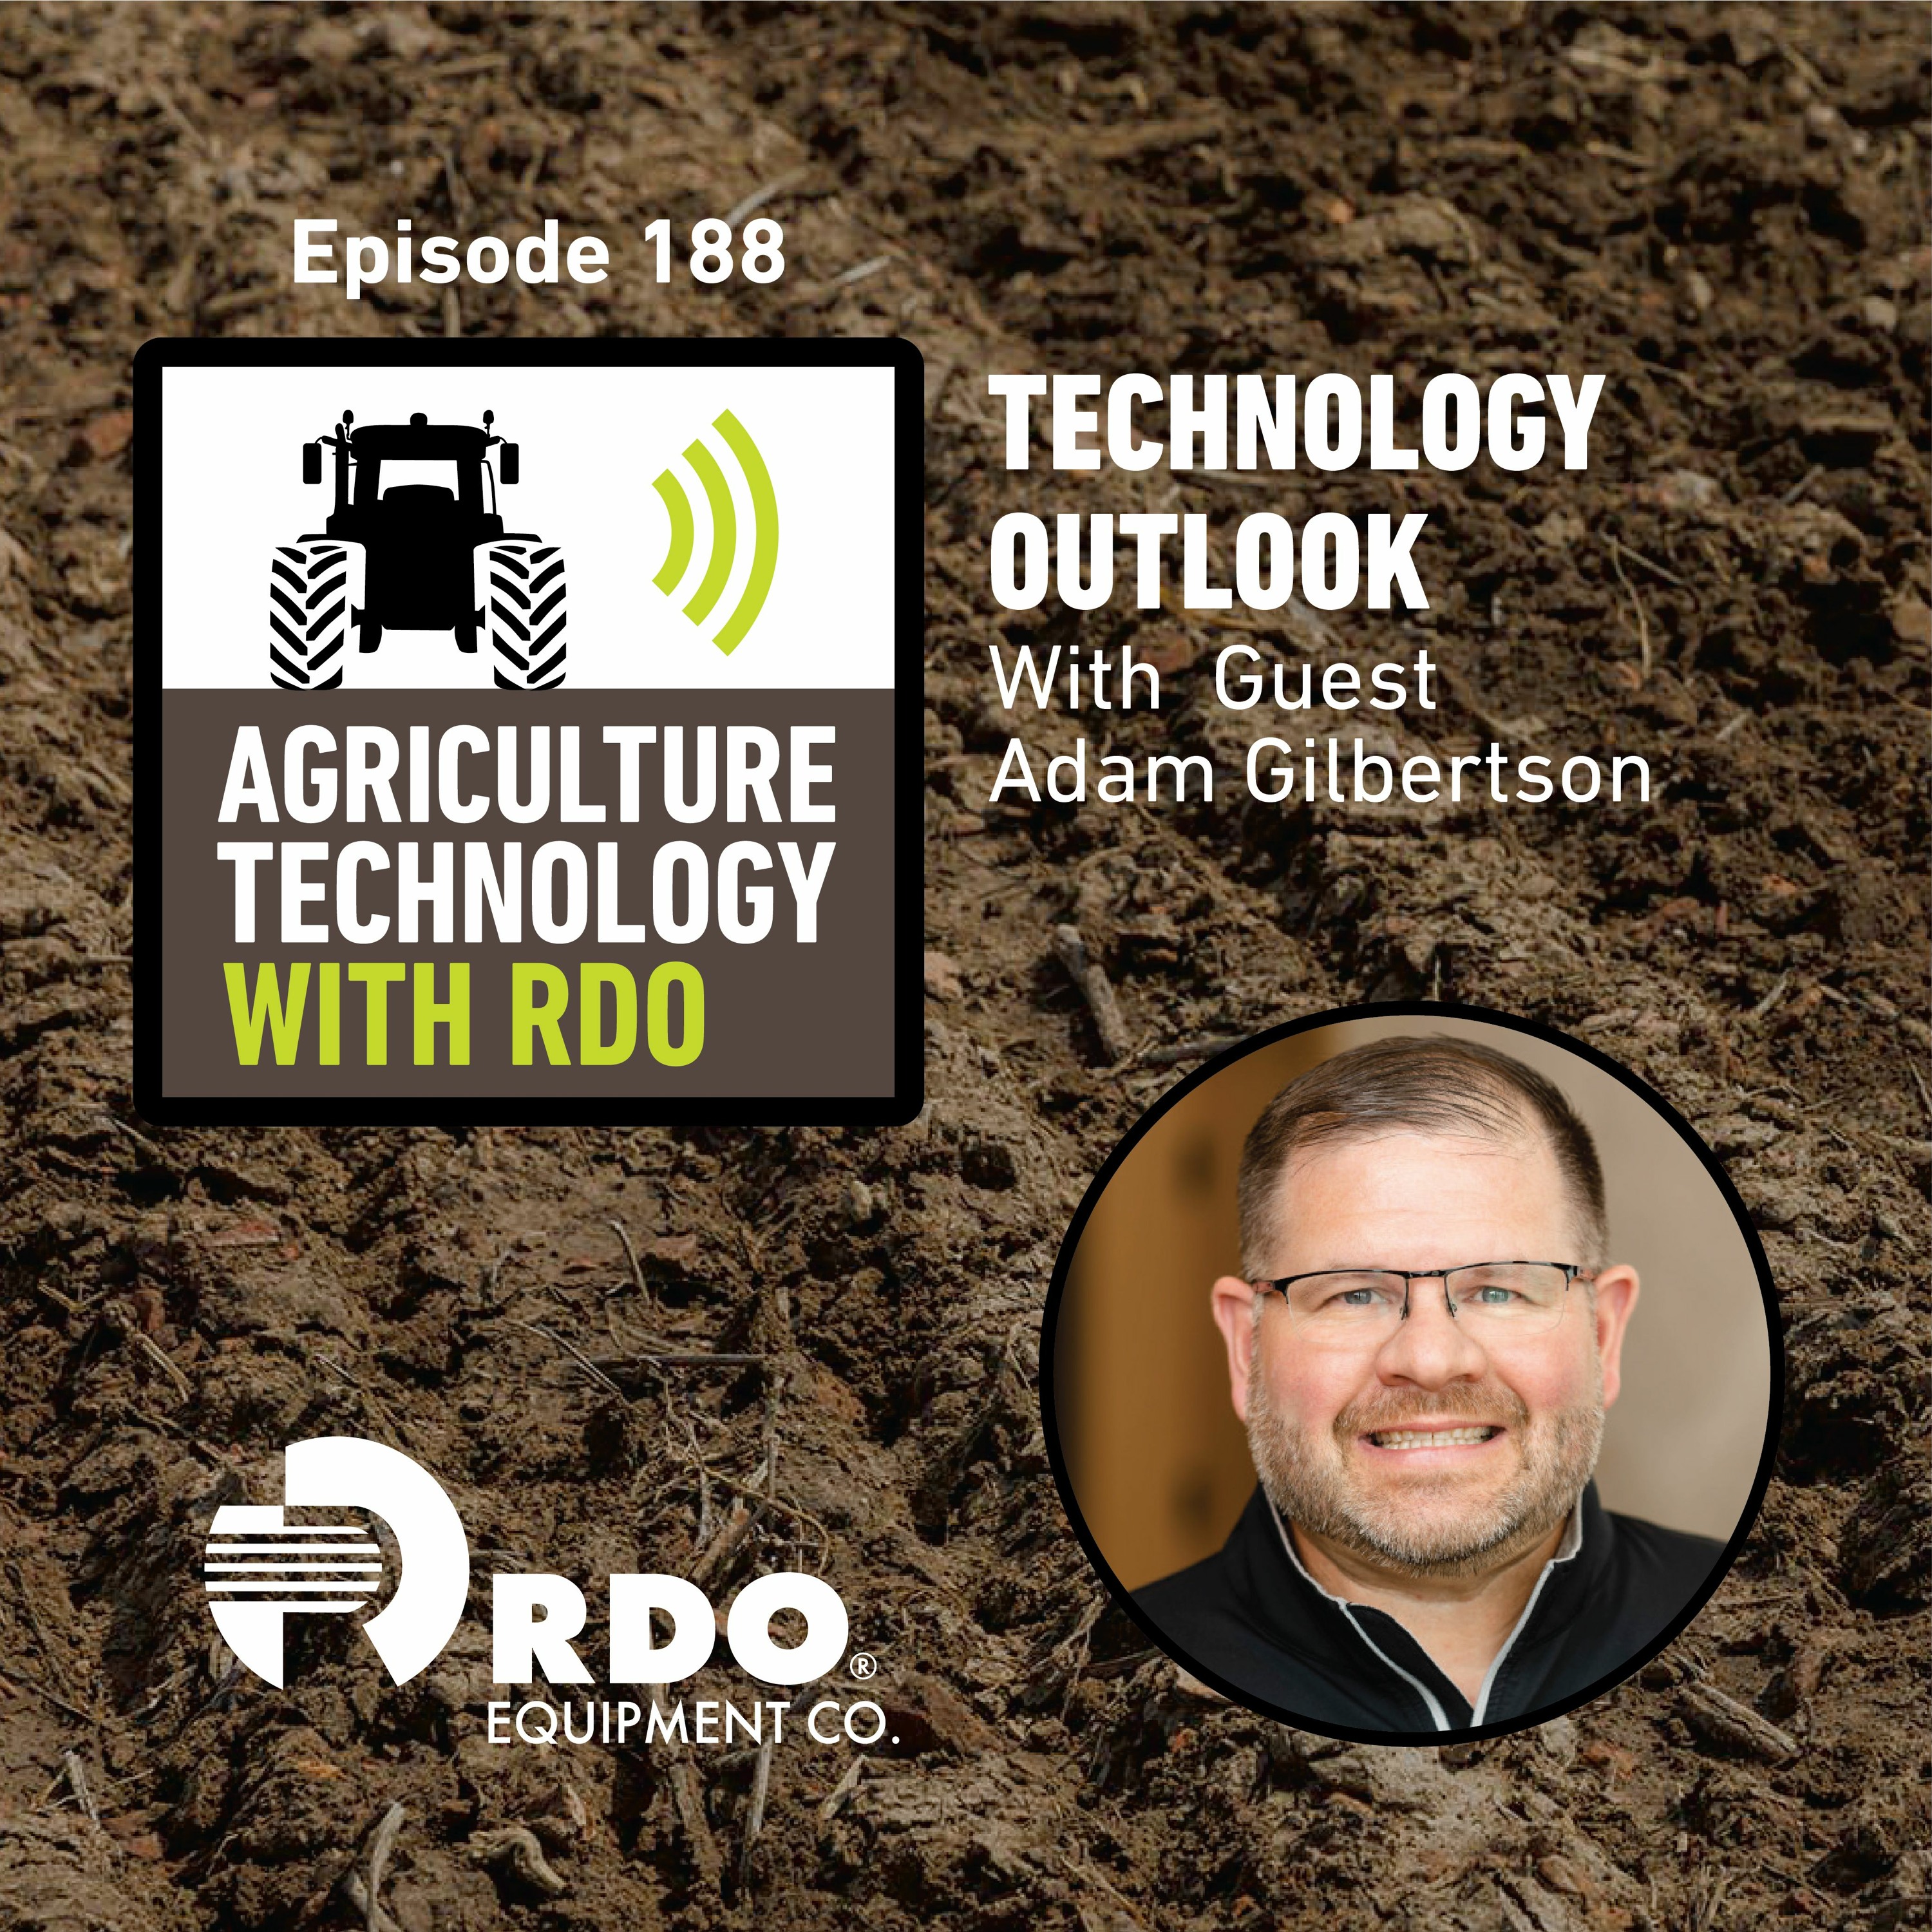 Ep. 188 - Technology Outlook with Guest Adam Gilbertson